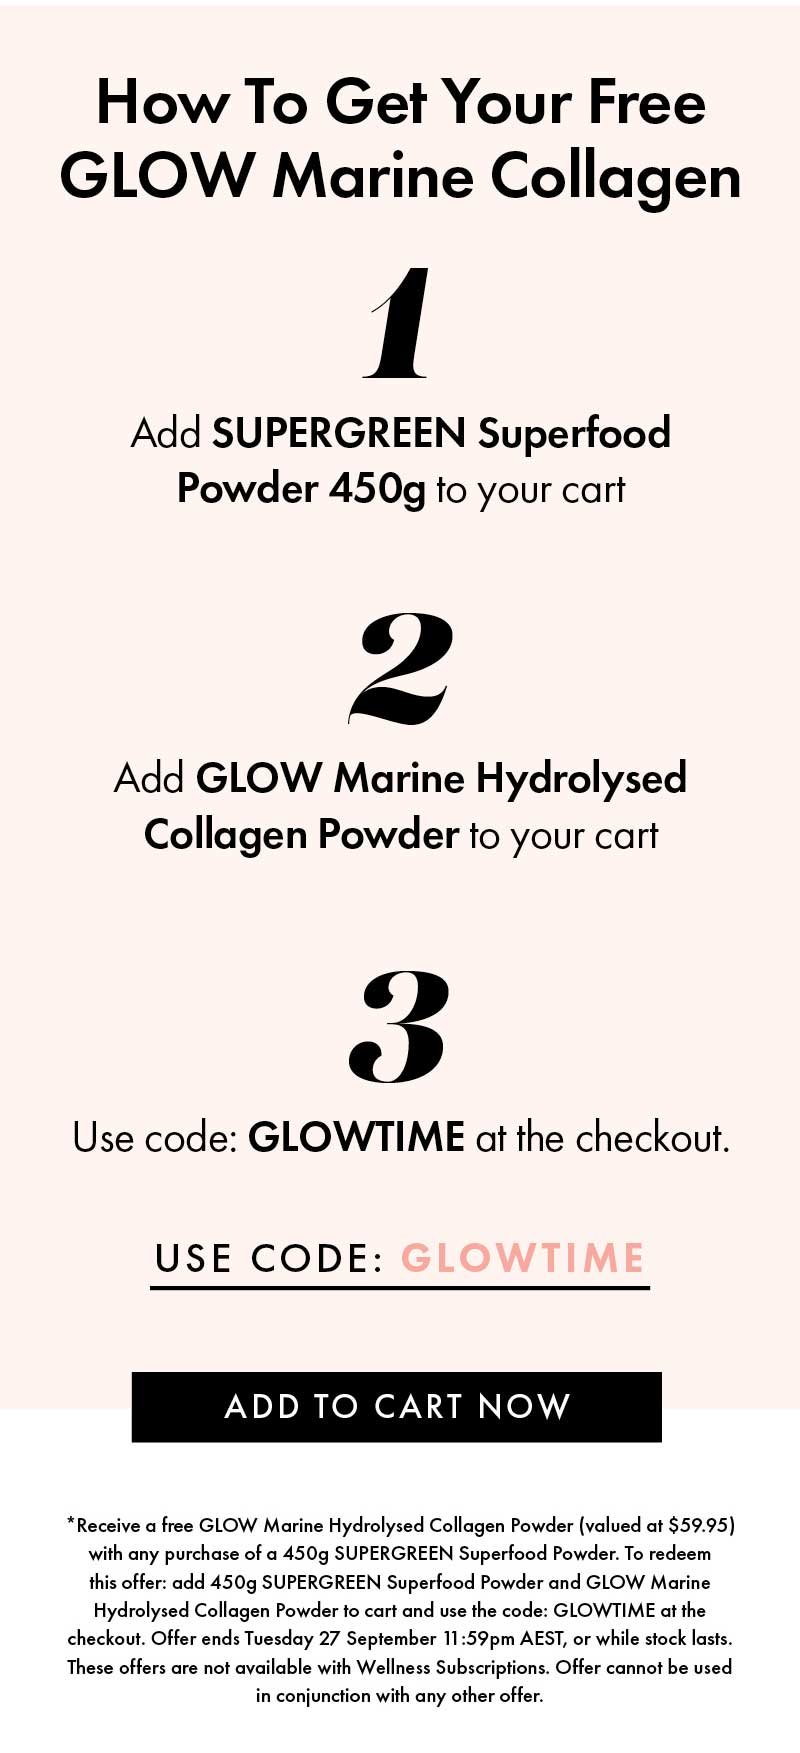 How To Get Your Free GLOW Marine Collagen - ADD TO CART NOW